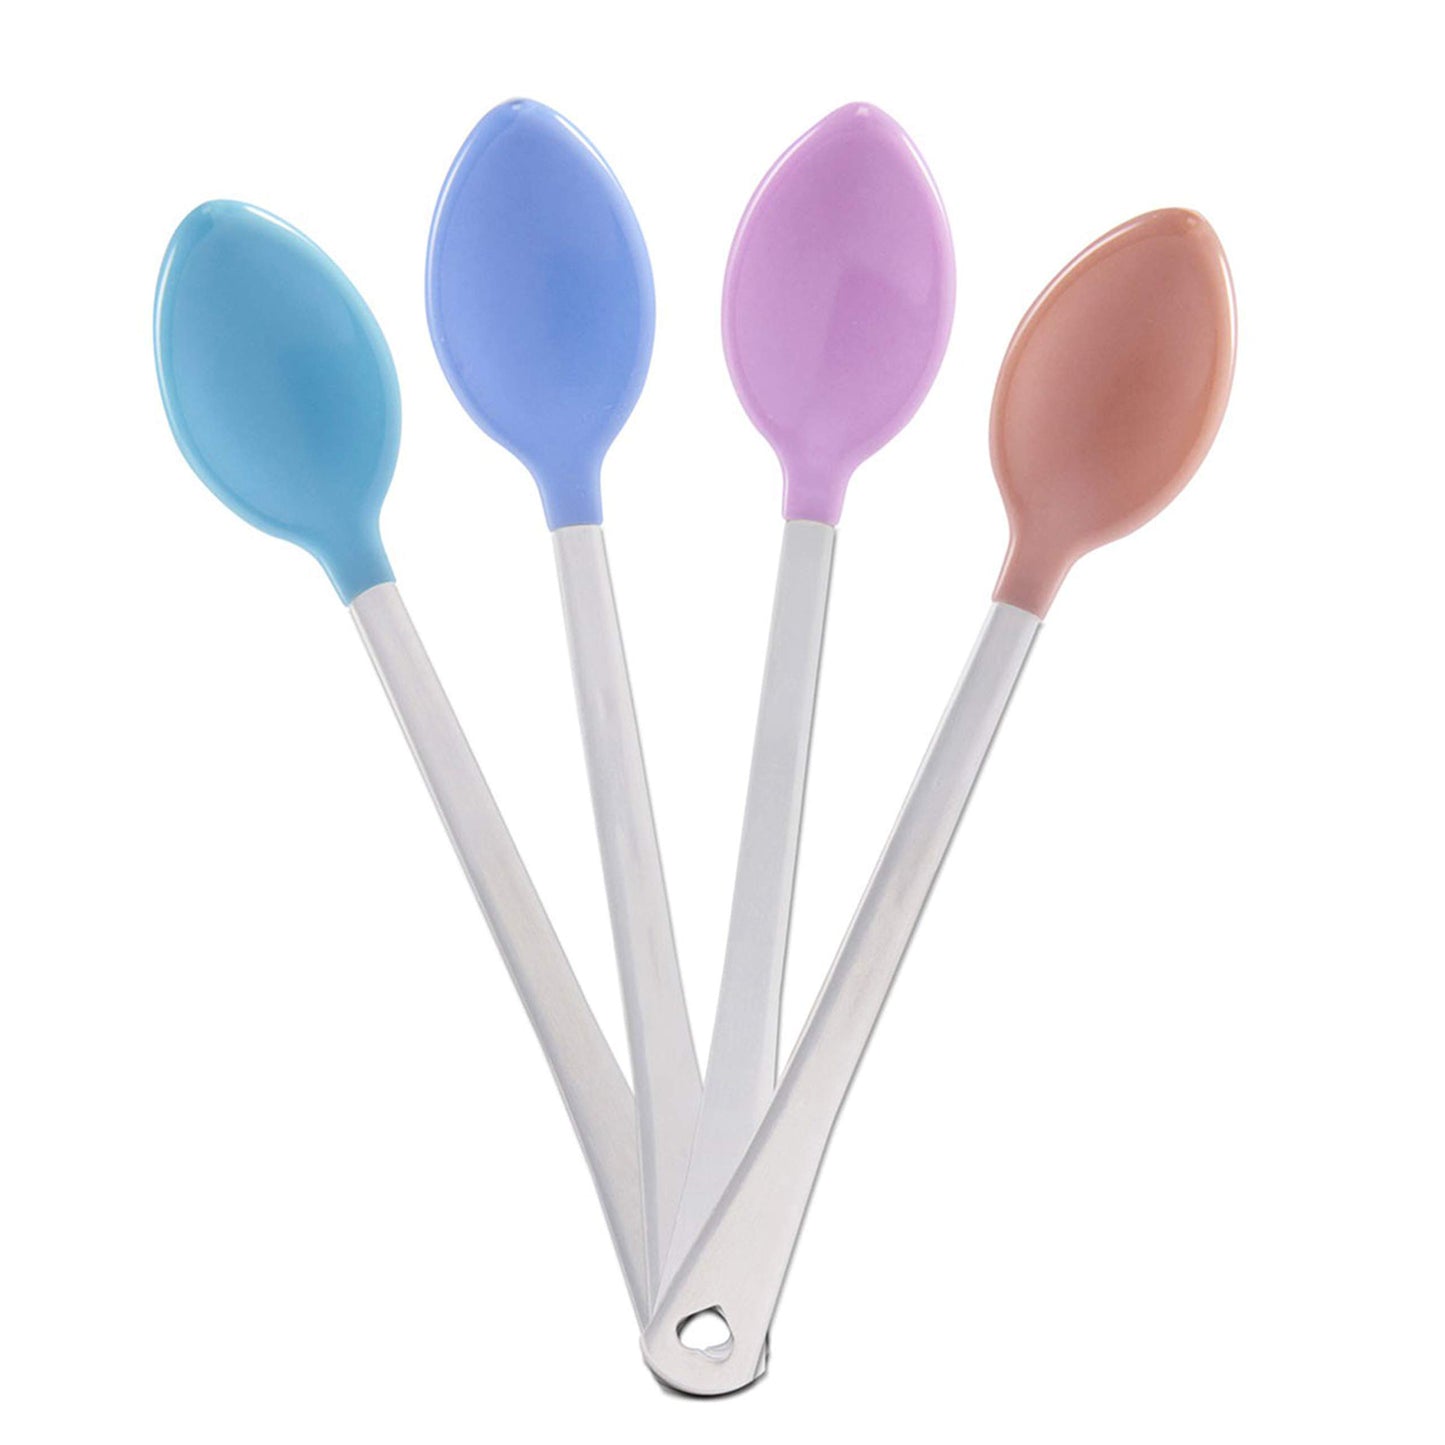 Munchkin White Hot Baby Safety Spoons, 8 Pack